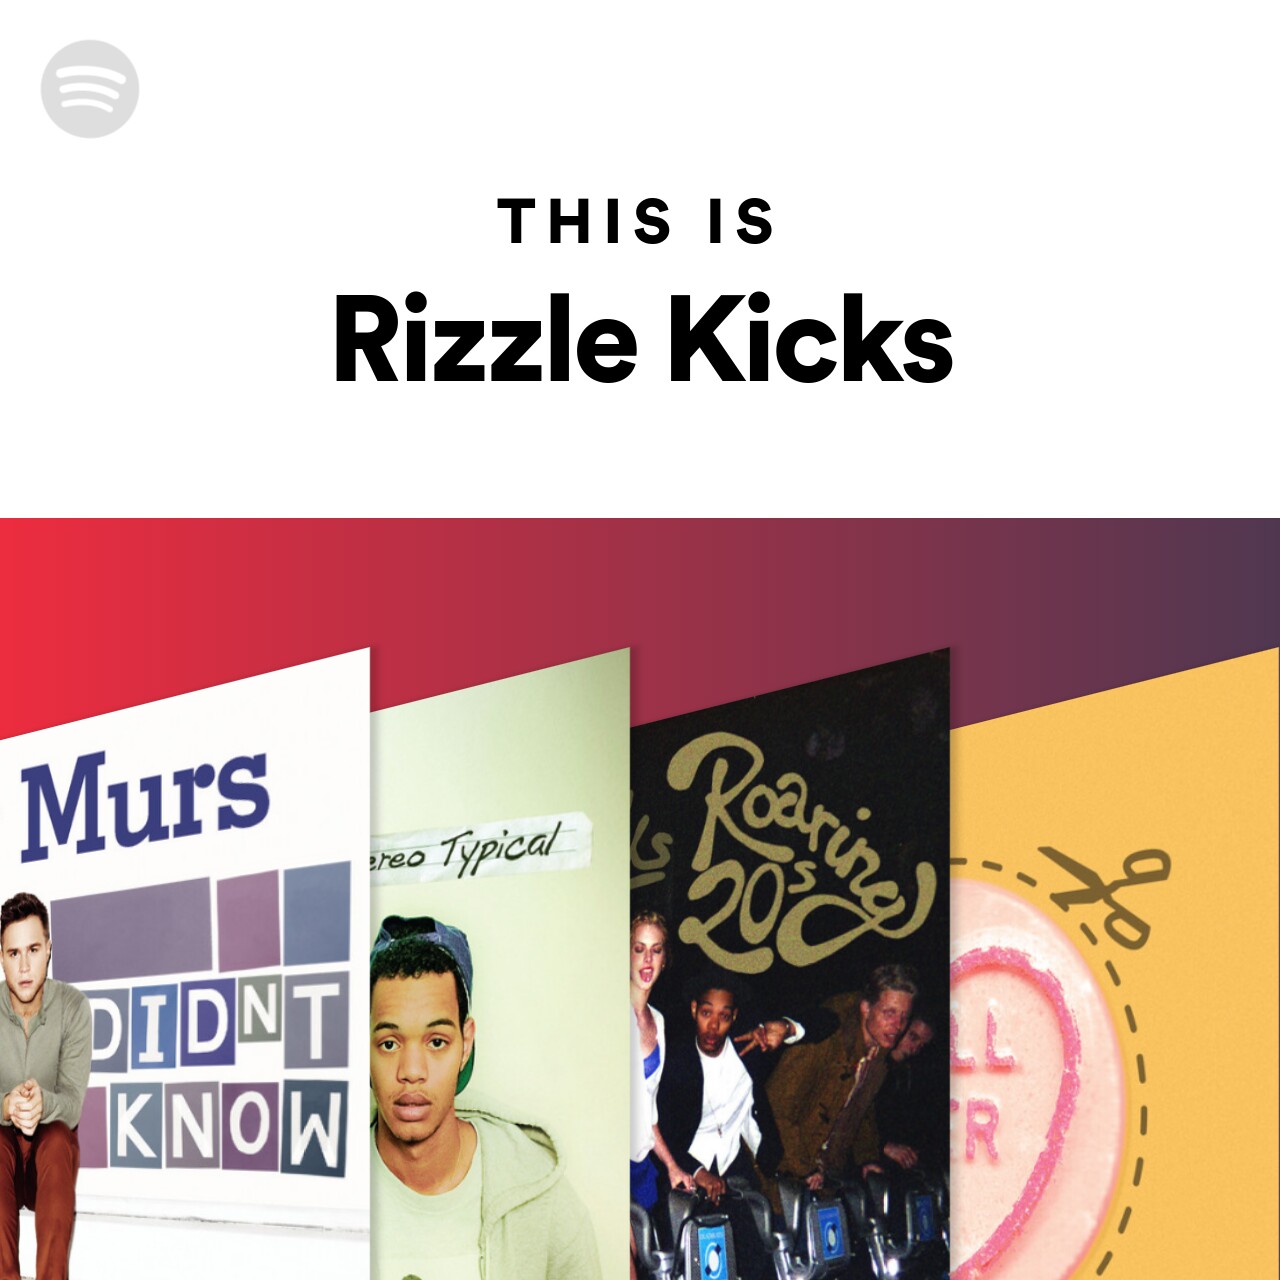 This Is Rizzle Kicks